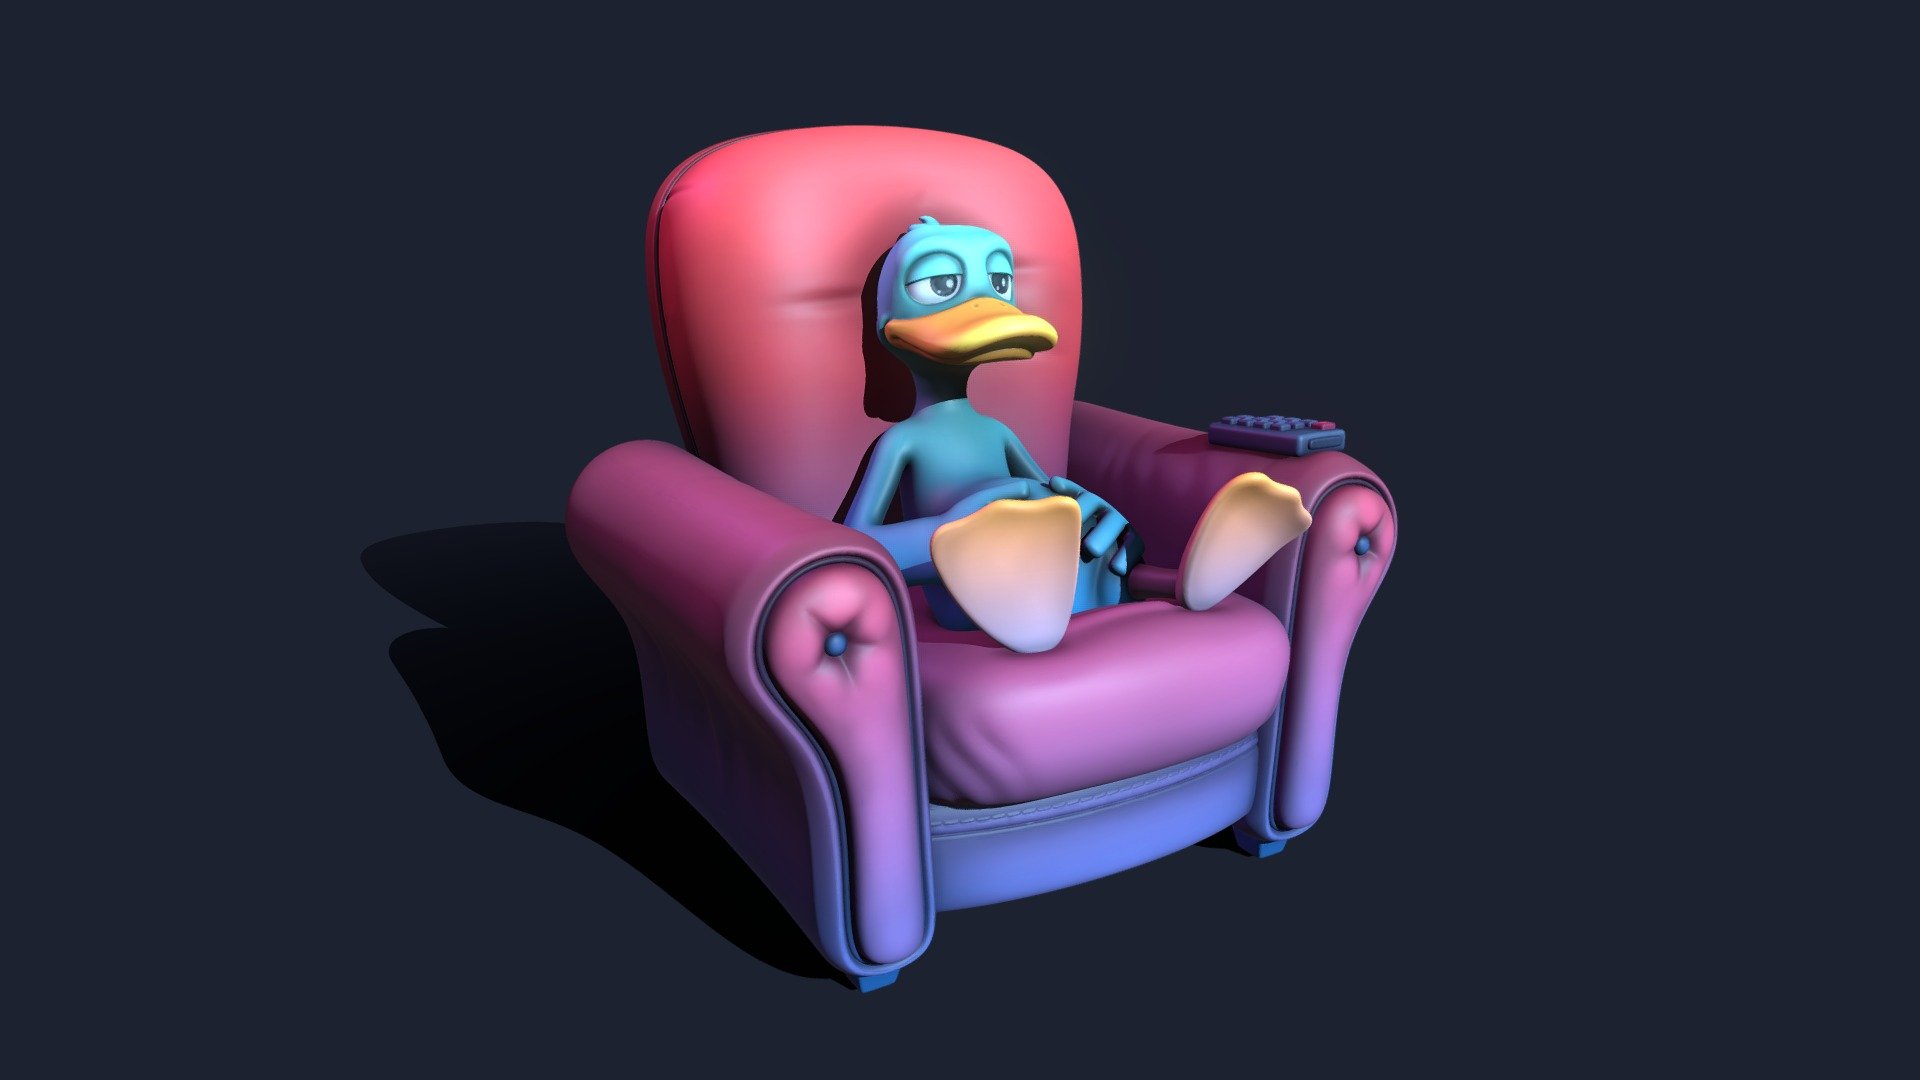 Cartoonish Duck model, made for 3D printing. It will be ready for download soon! - Relaxed Duck - 3D model by BlackSpire 3d model